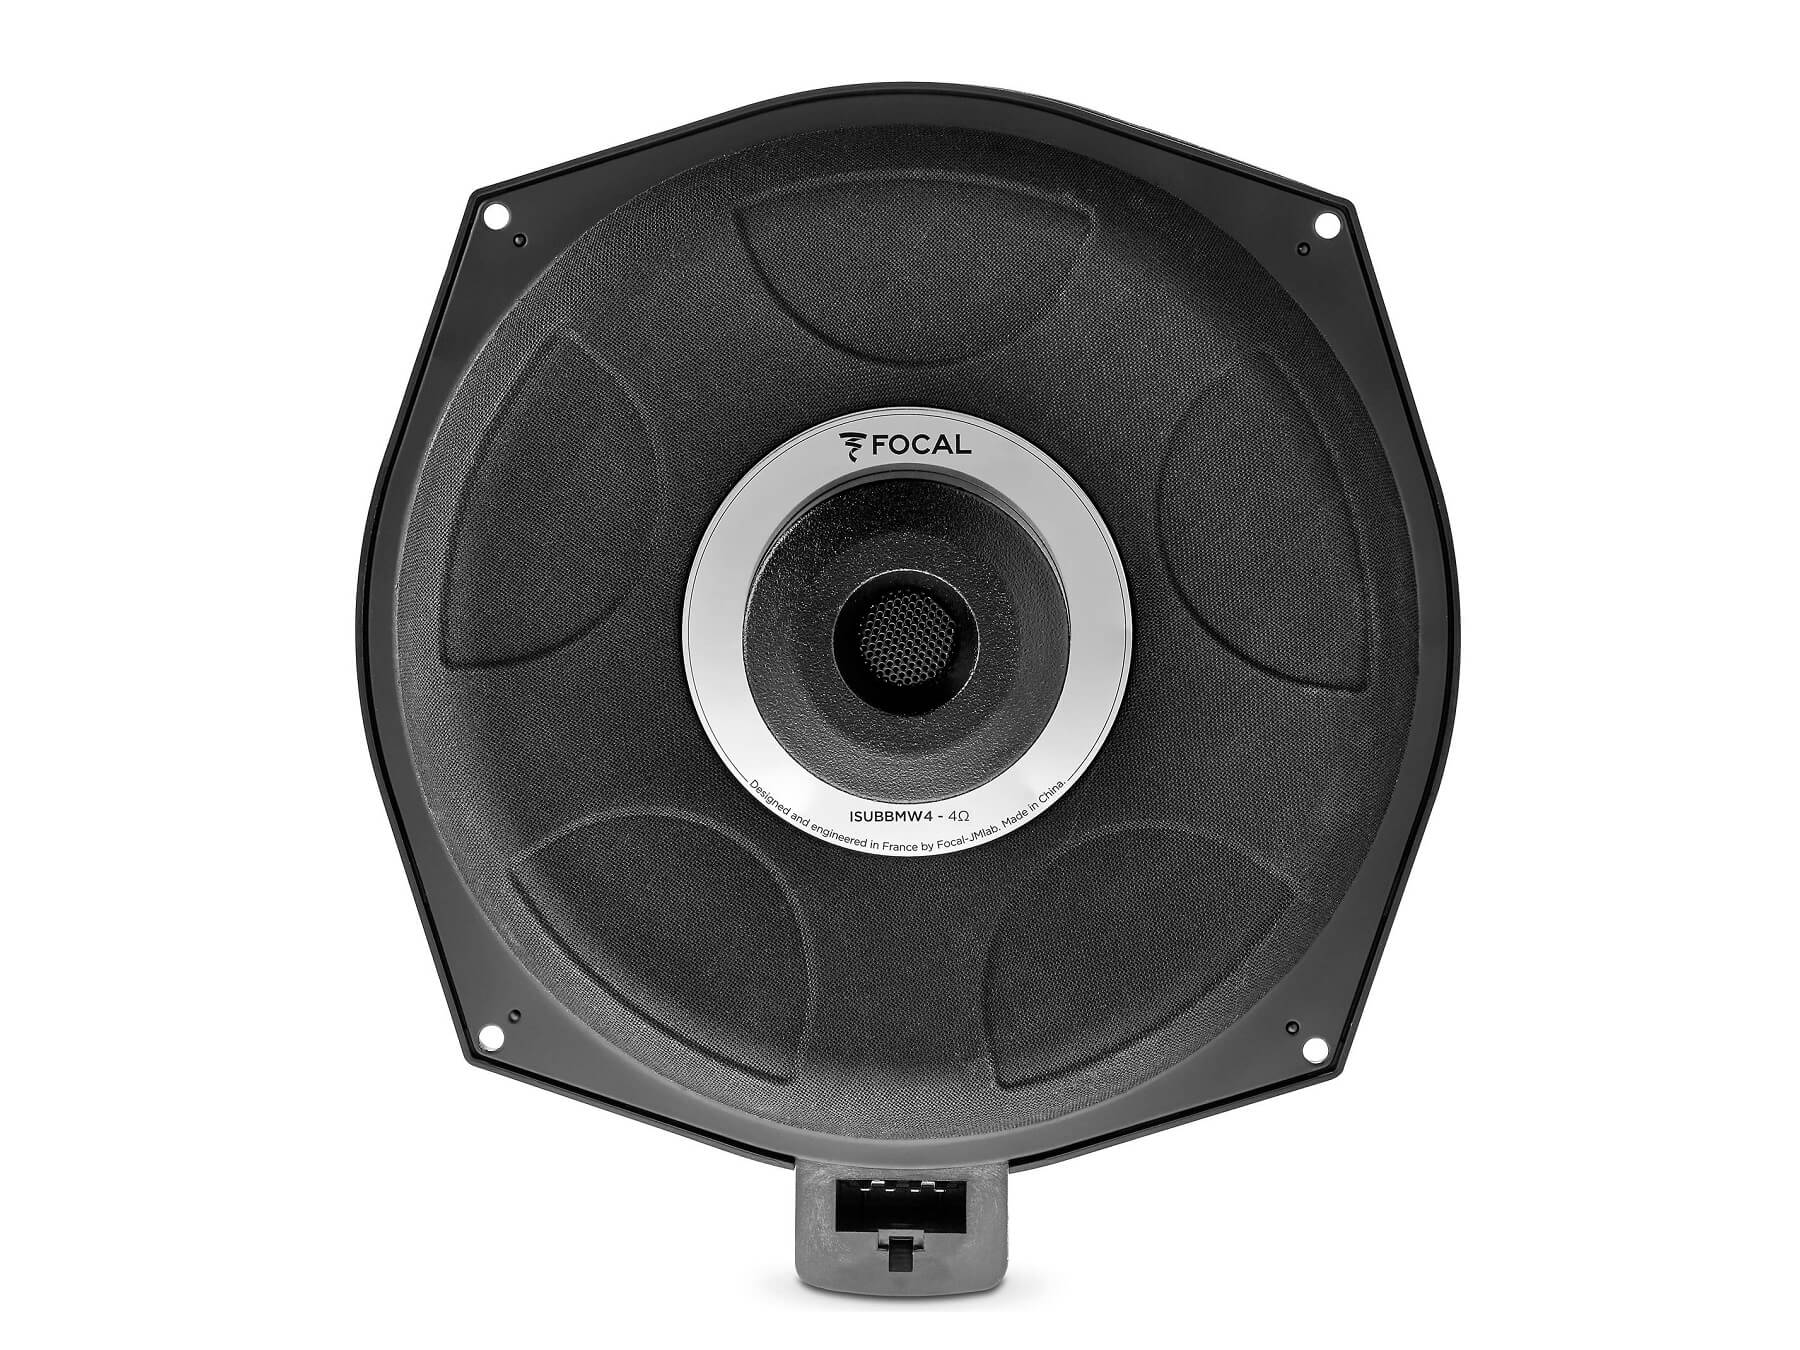 Focal ISUB BMW 4 - 8 Inch Flat Subwoofer - Top